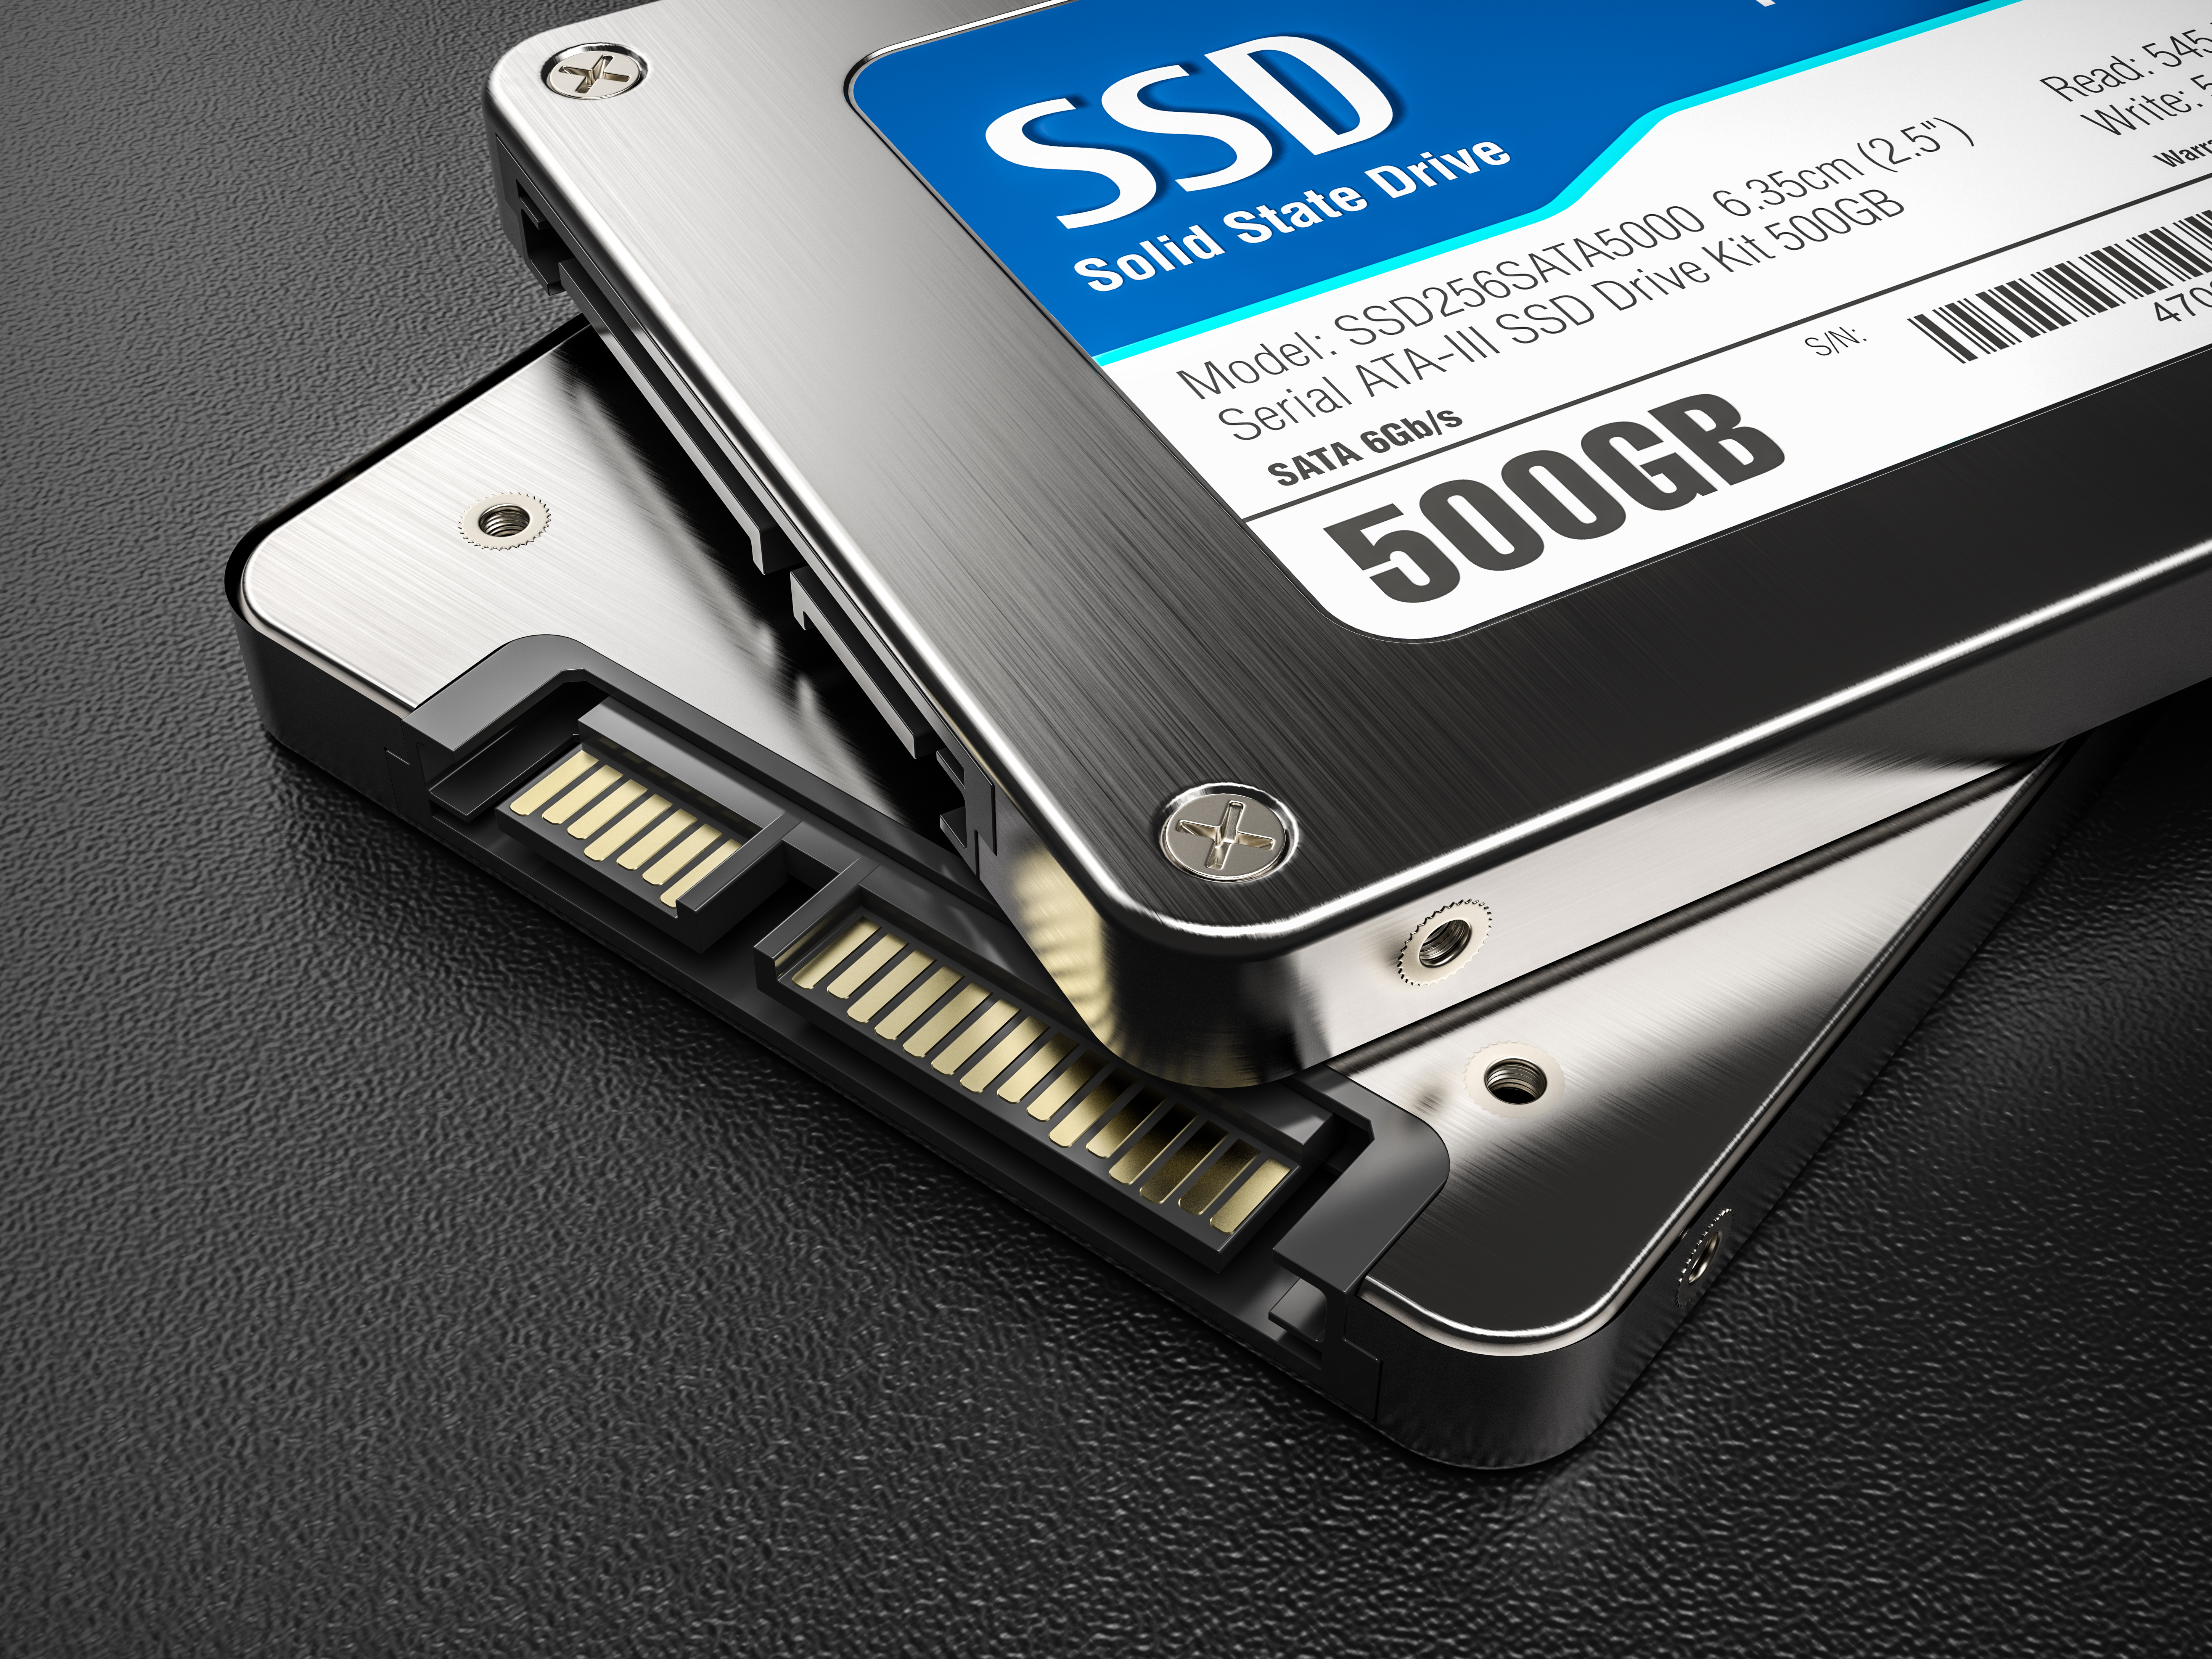 Soviet Planet Related Does SSD size affect speed in gaming? - Newegg Insider